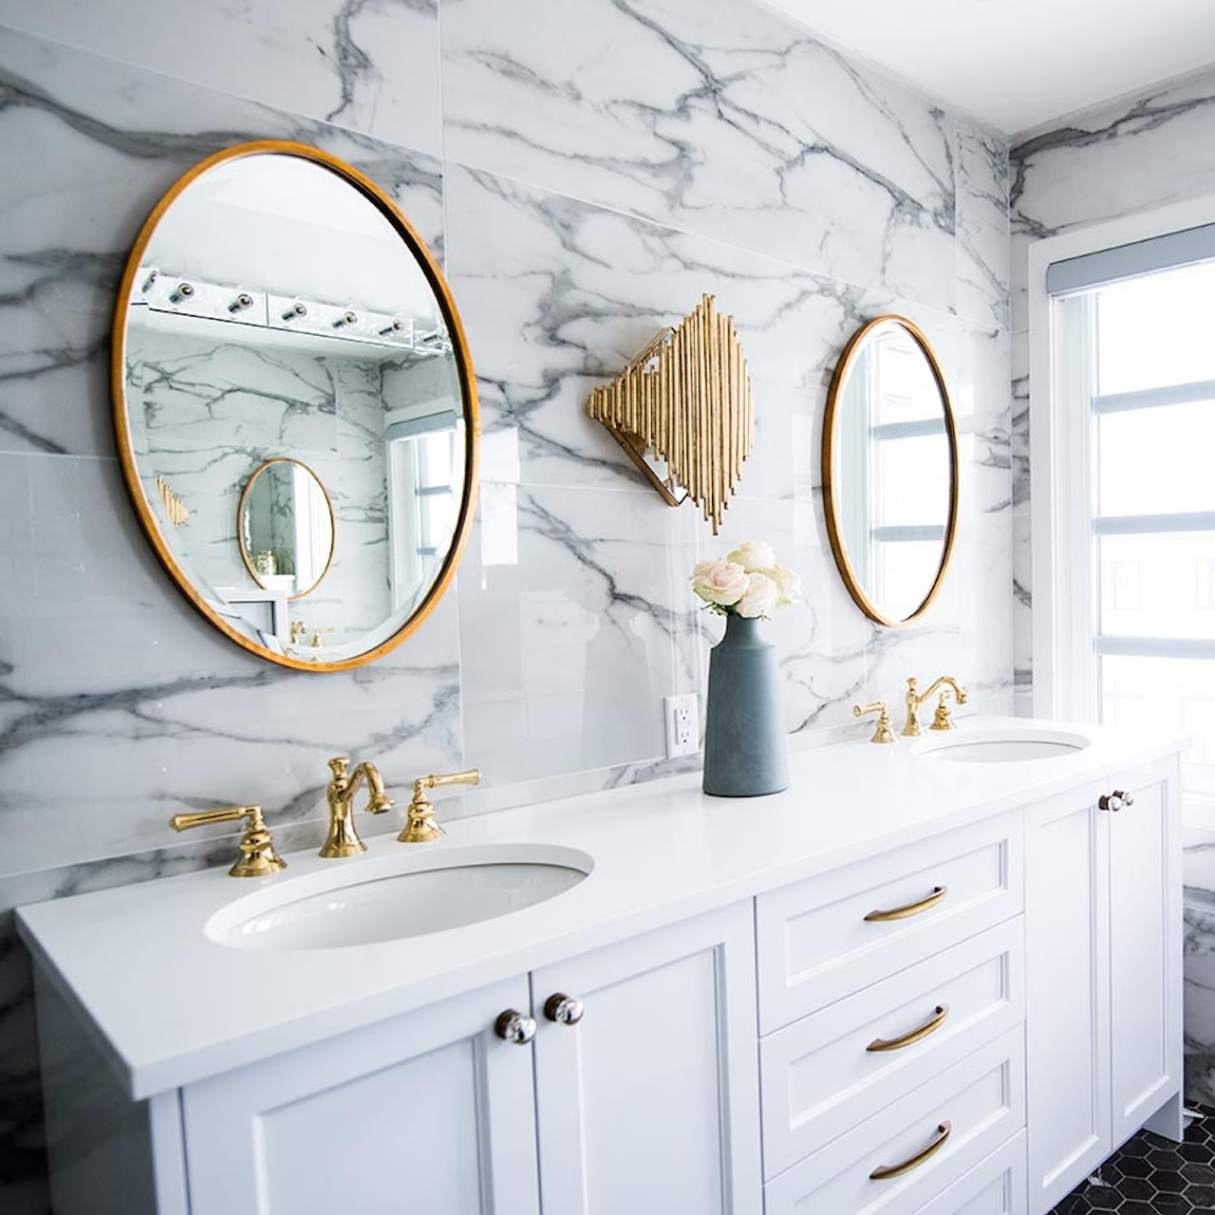 What To Put Between Bathroom Mirrors